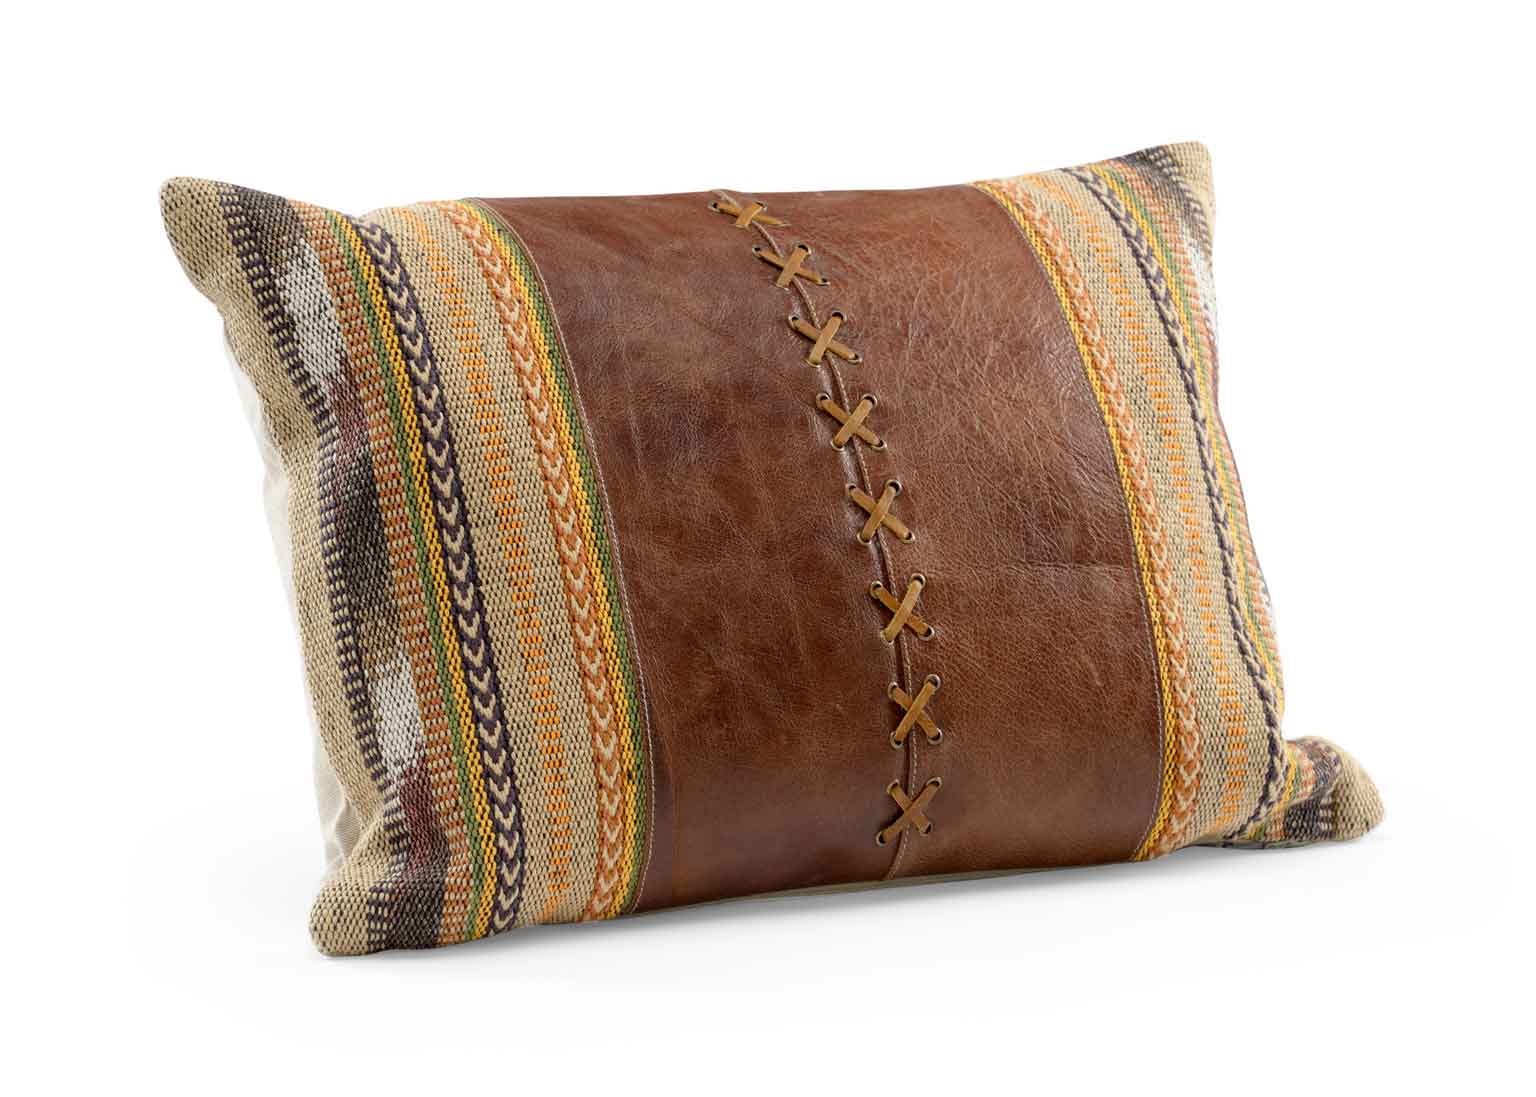 Cheyenne Pillow Rustic Leather and Fabric Wildwood